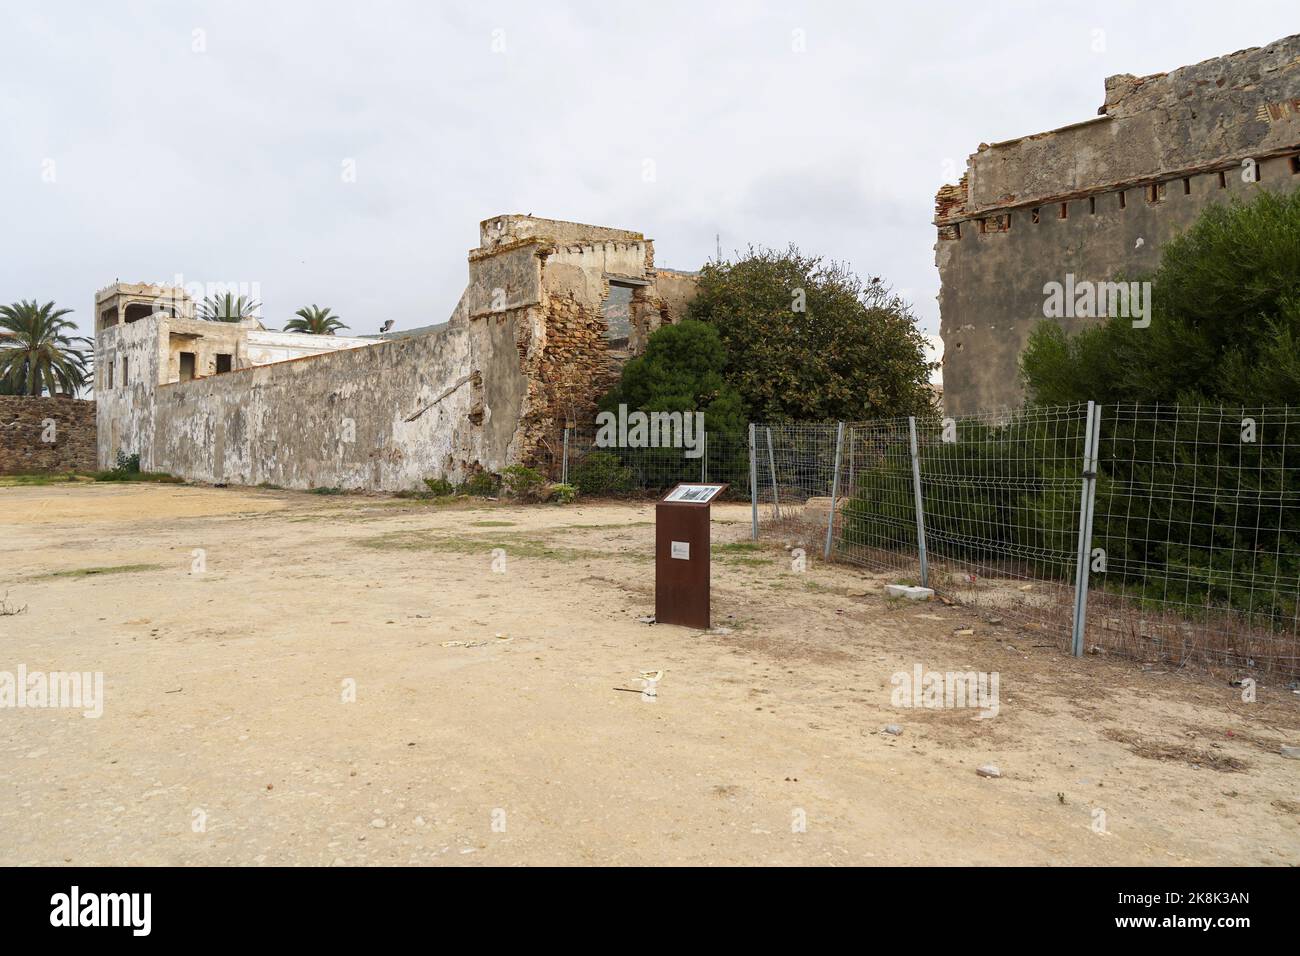 Zahara de los Atunes, Castillo, remains and ruins of outer walls of Castle, Andalucia, Spain. Stock Photo